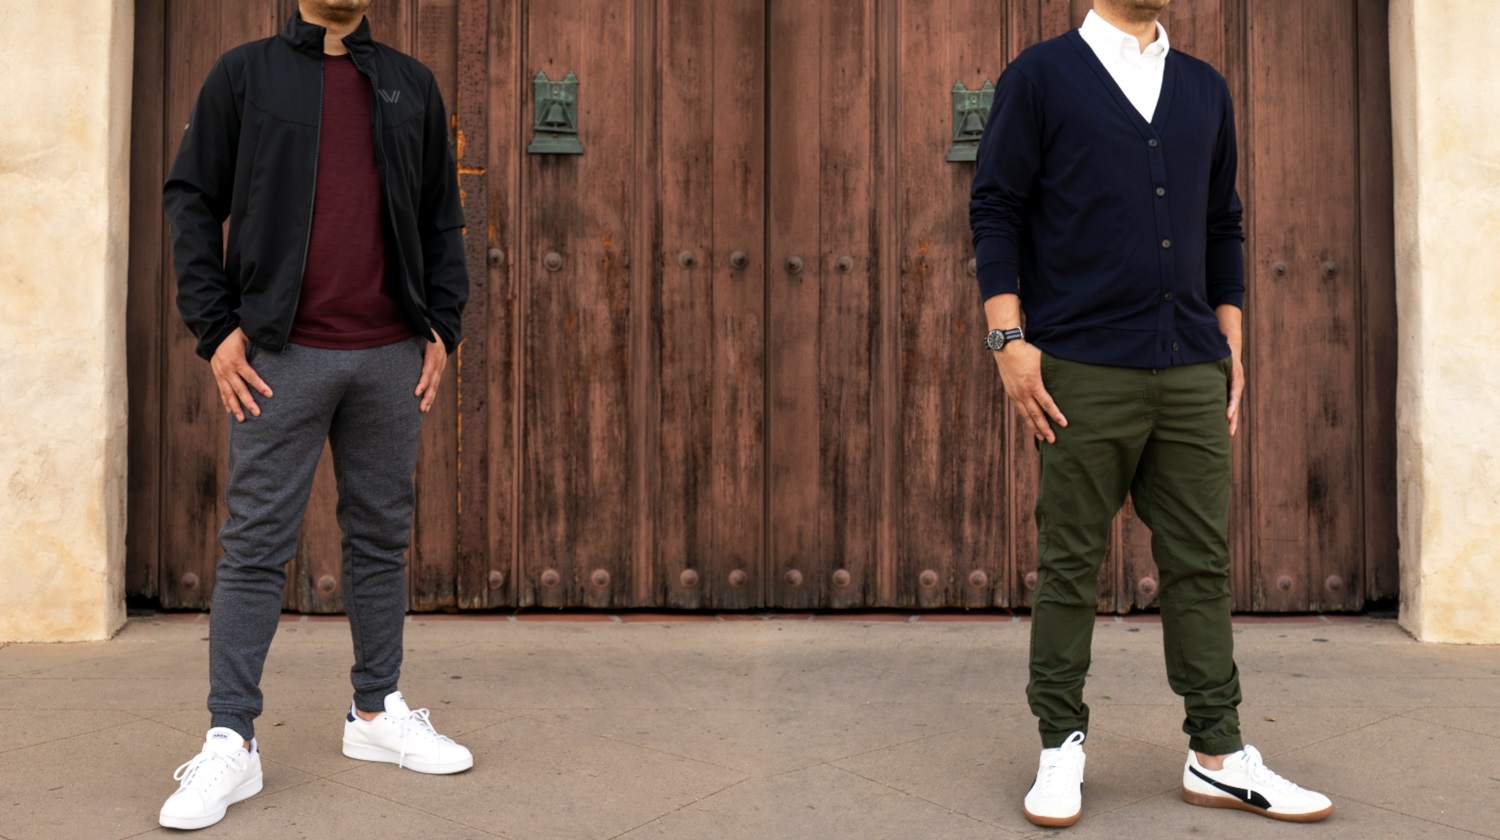 Dressy Athleisure Like Chino Joggers Are the New Menswear Style